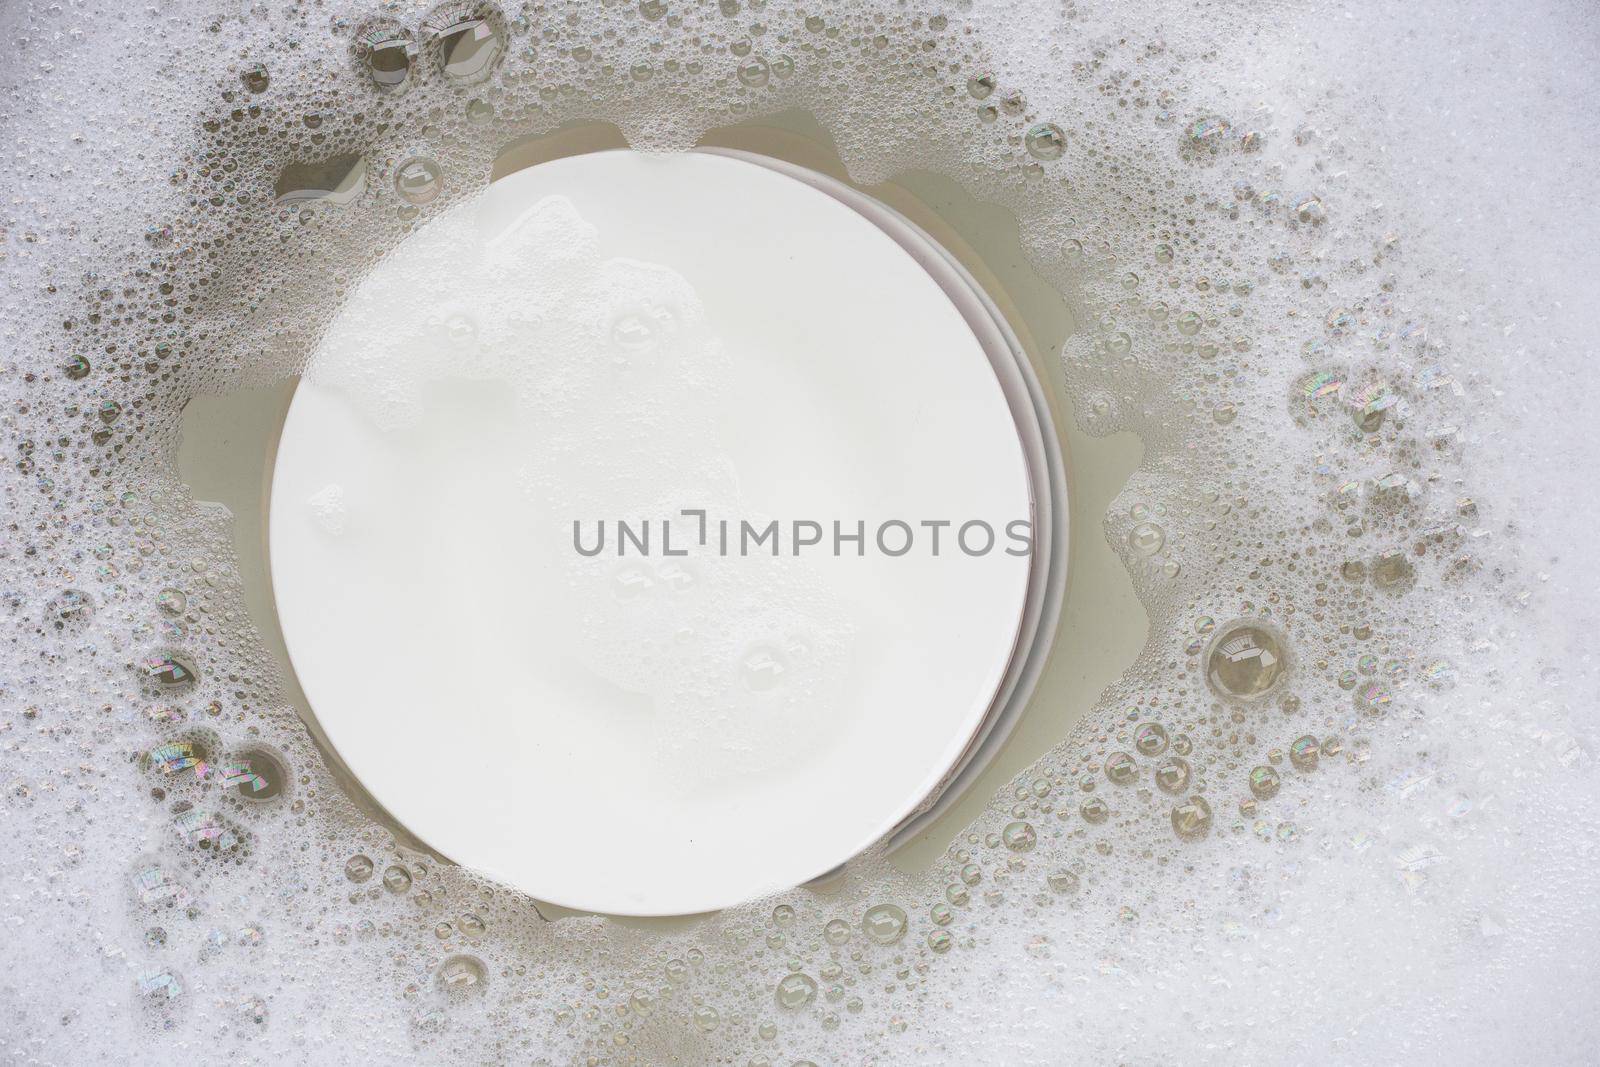 Washing dishes, Close up of utensils soaking in kitchen sink. by Bowonpat